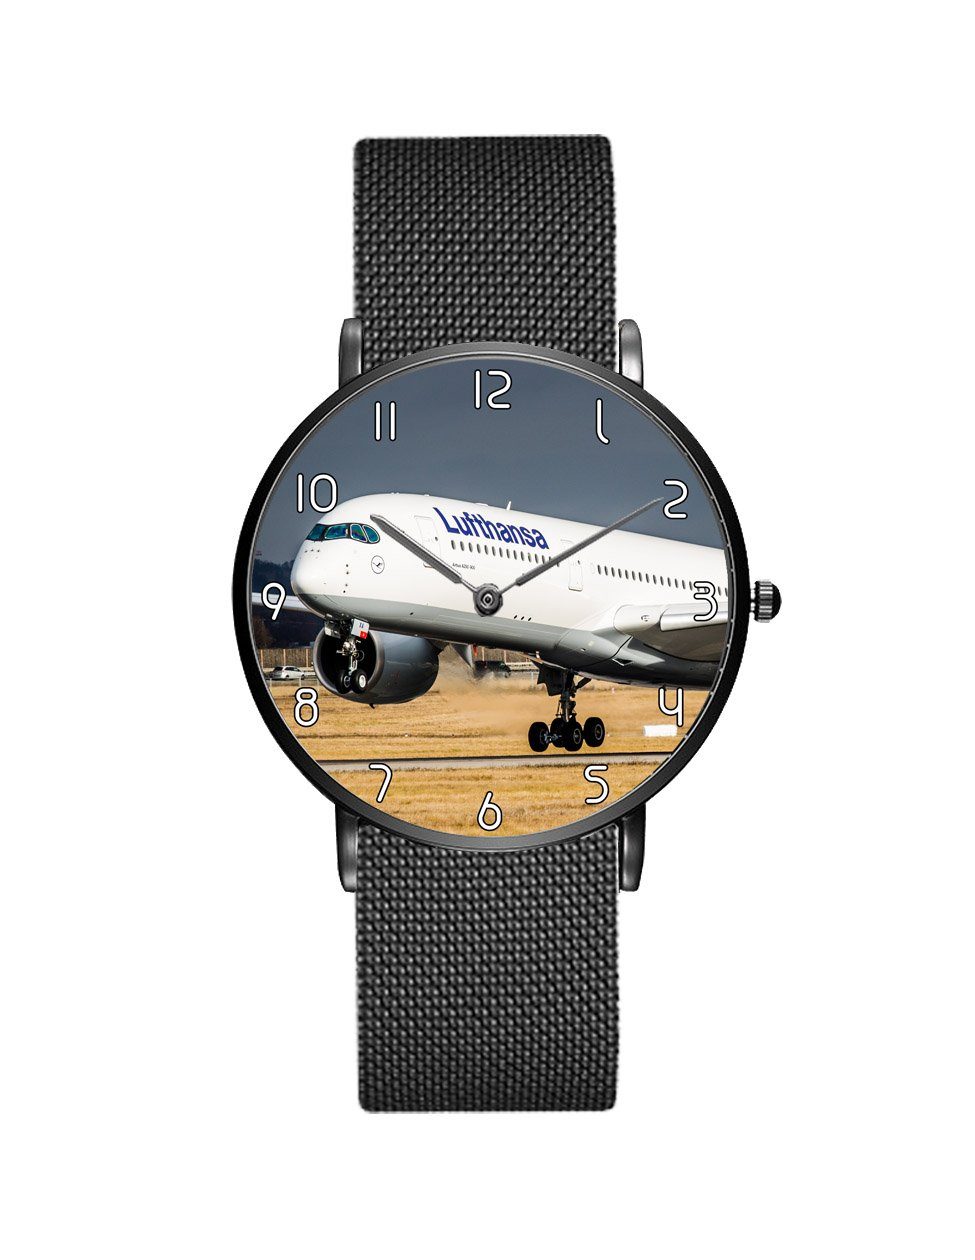 Lutfhansa A350 Printed Stainless Steel Strap Watches Aviation Shop Black & Stainless Steel Strap 